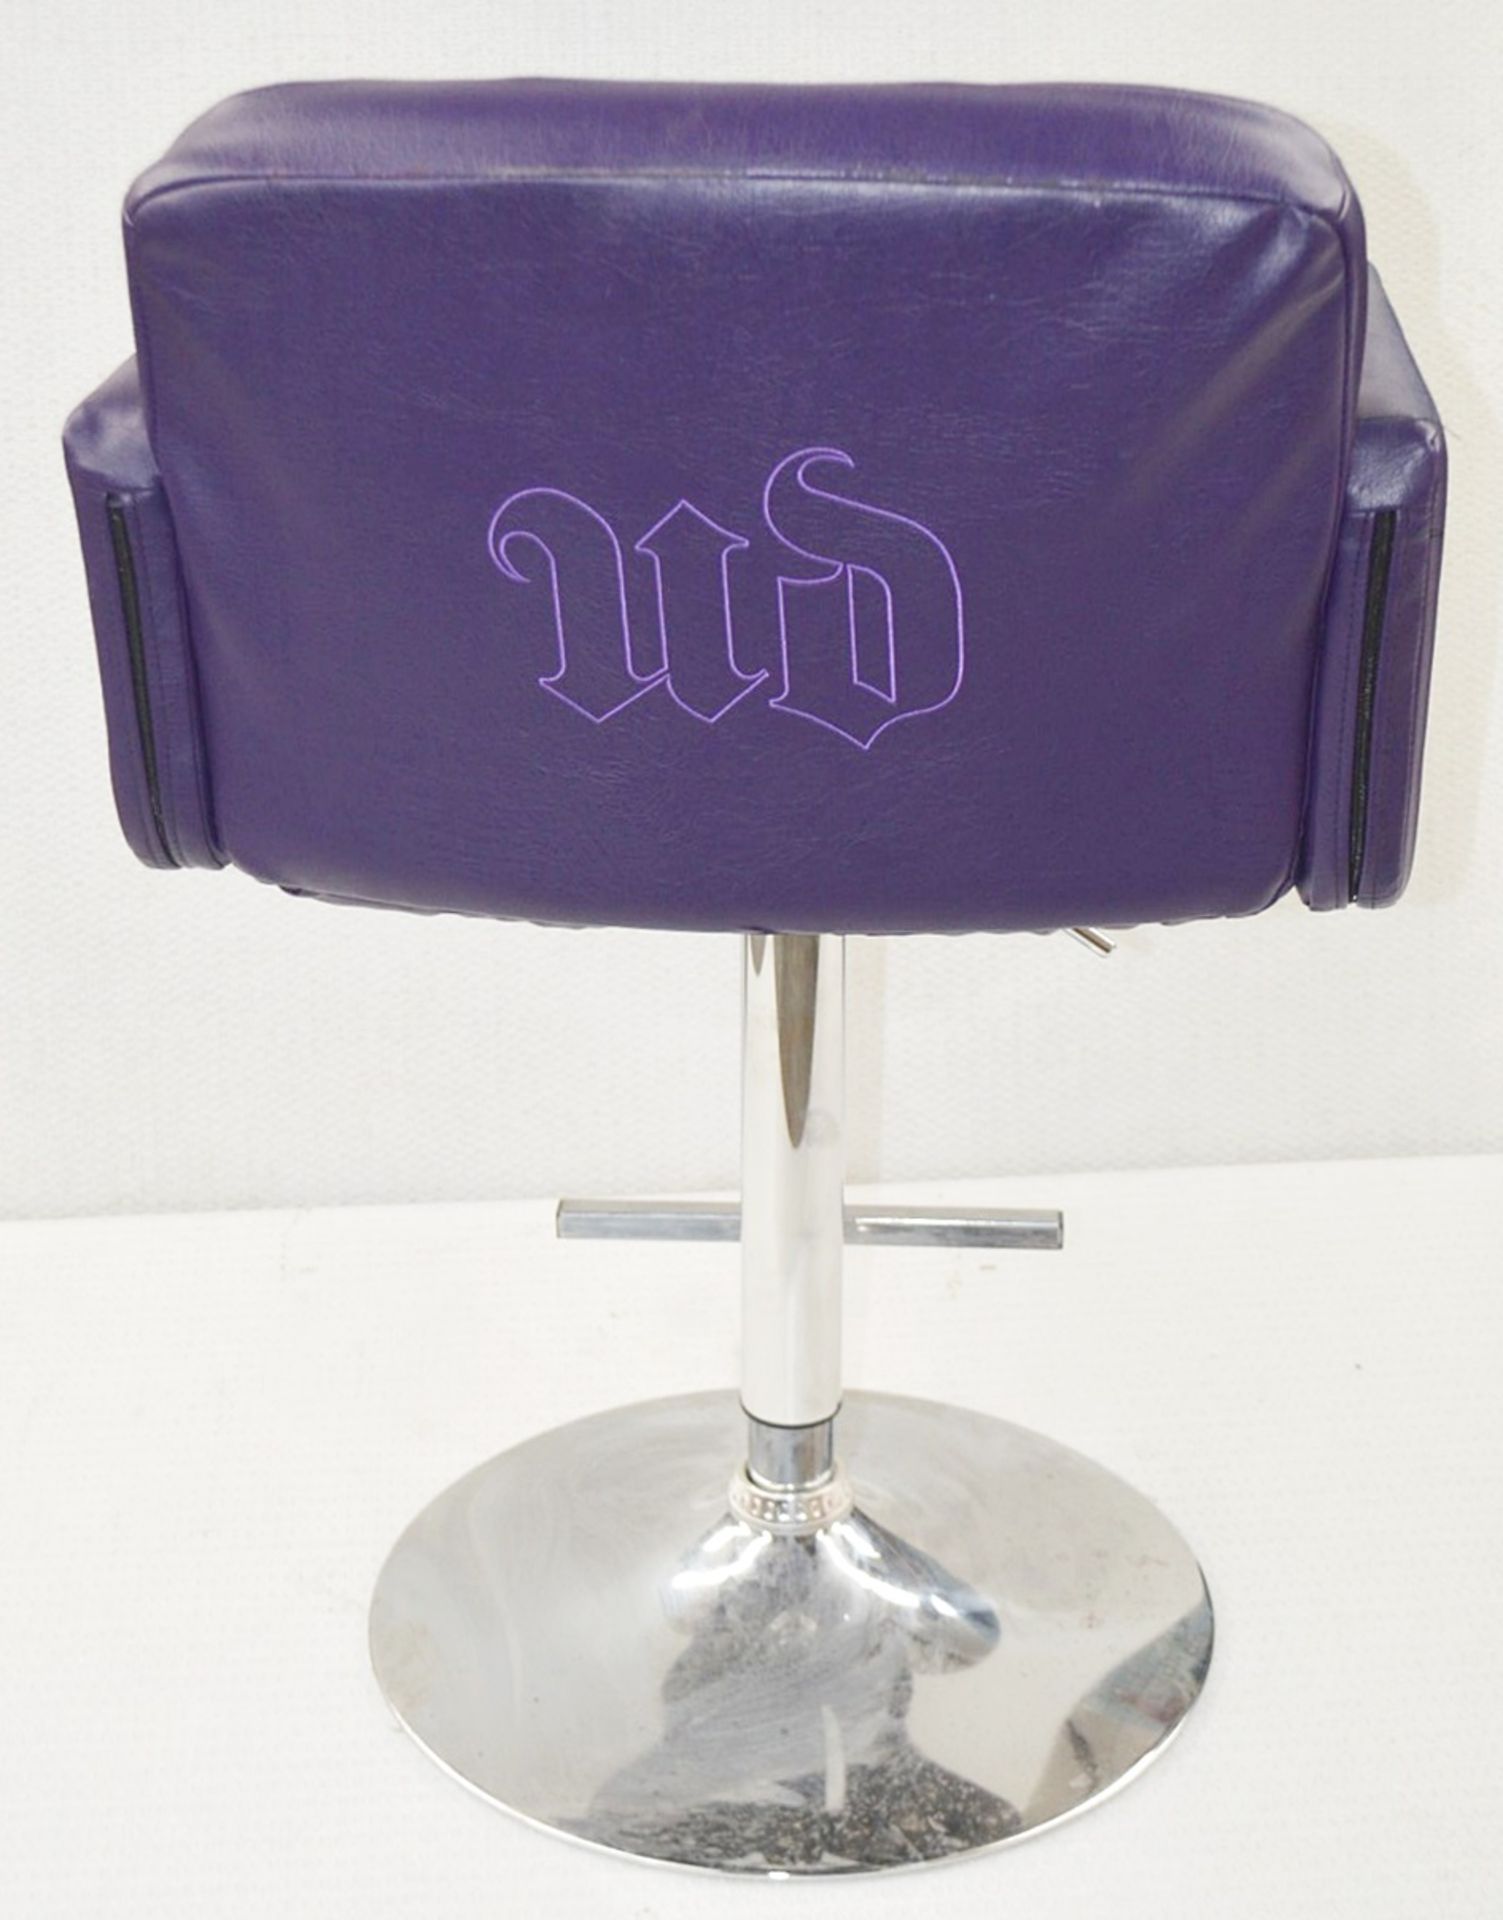 1 x URBAN DECAY Branded Gas-Lift Beauty Salon Swivel Chair With Foot Plate - Upholstered In Purple - Image 4 of 6